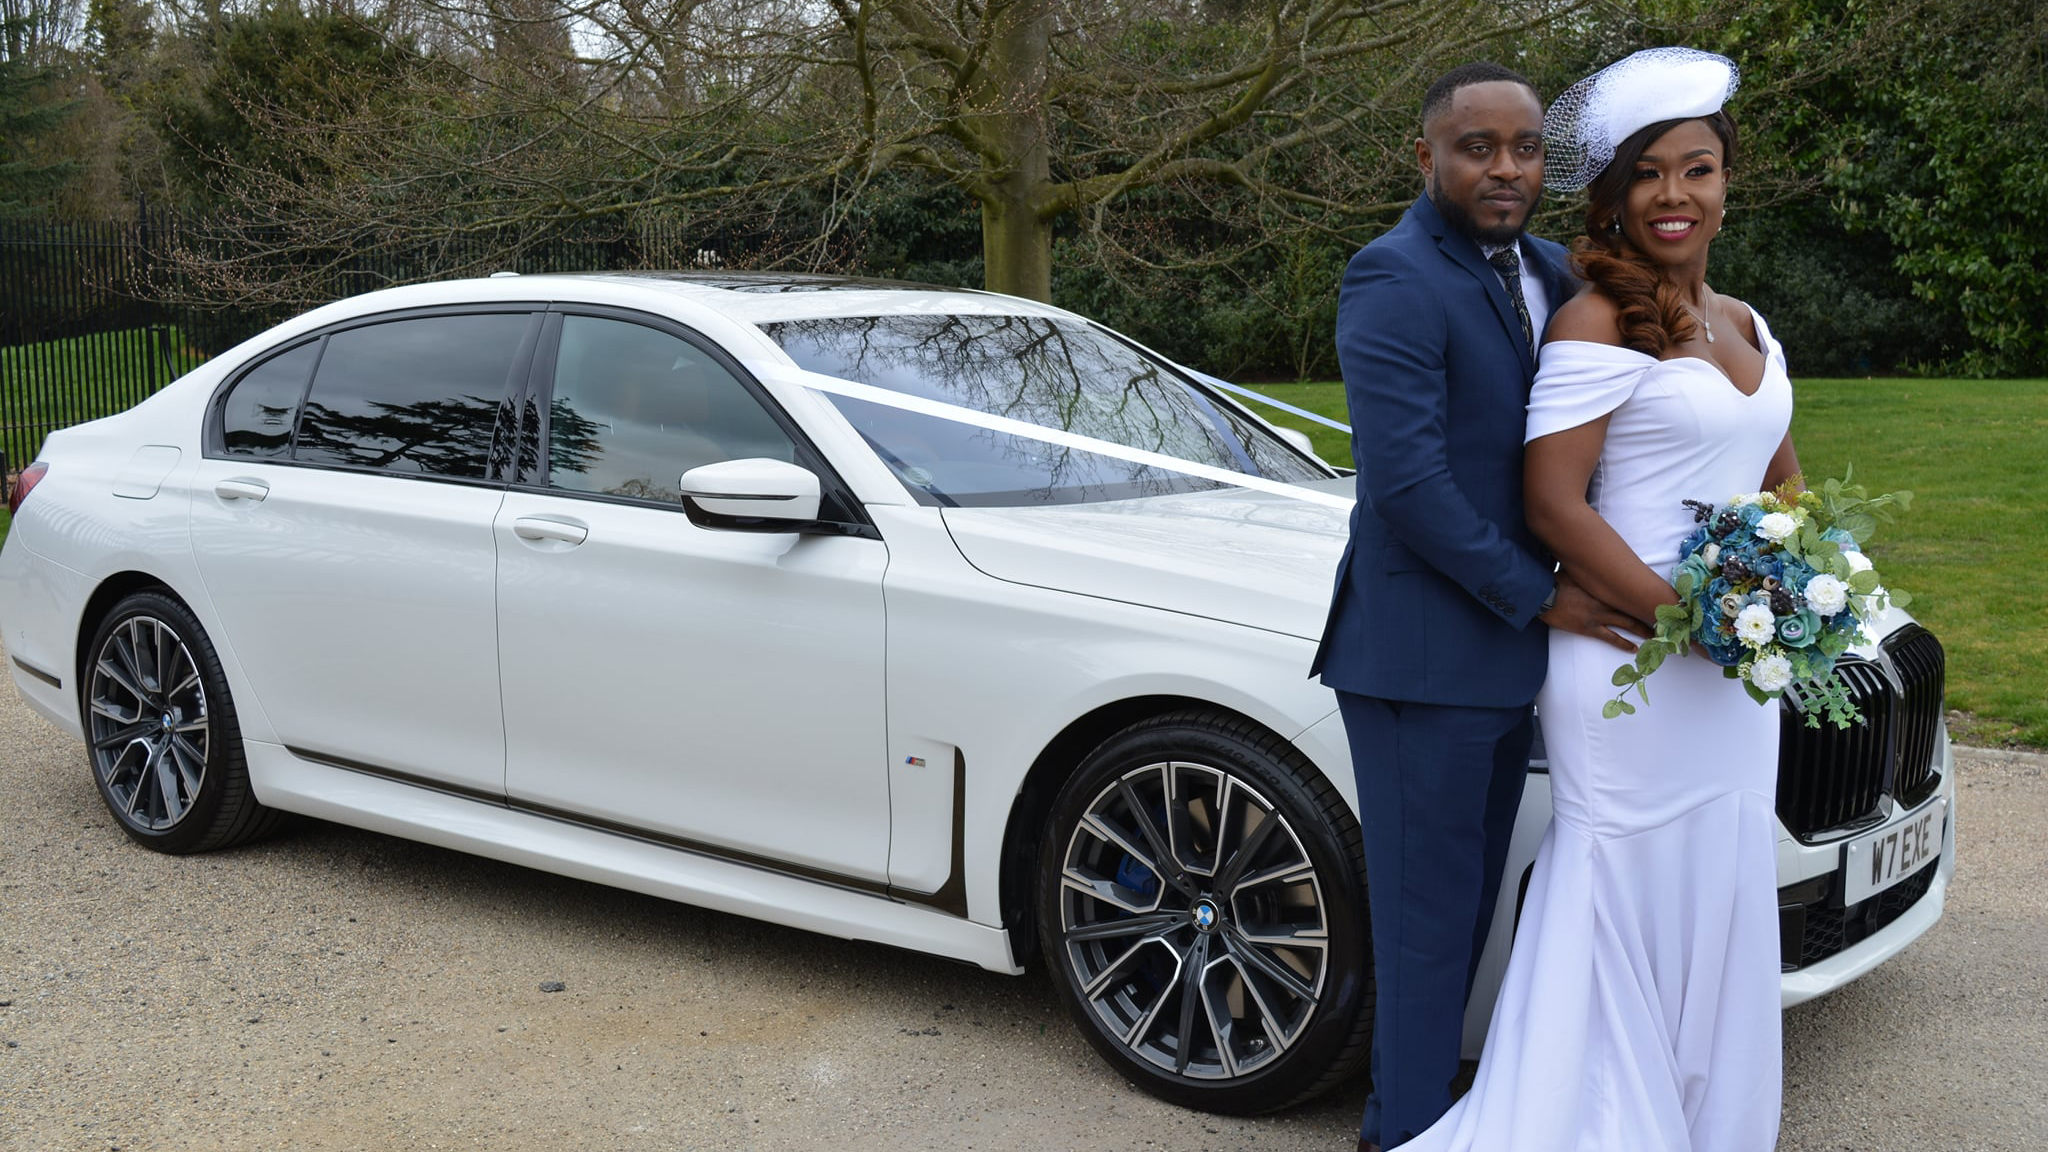 White BMW decorated with white ribbons. Bride and Groom are standing by the vehicle smiling and holding each others.